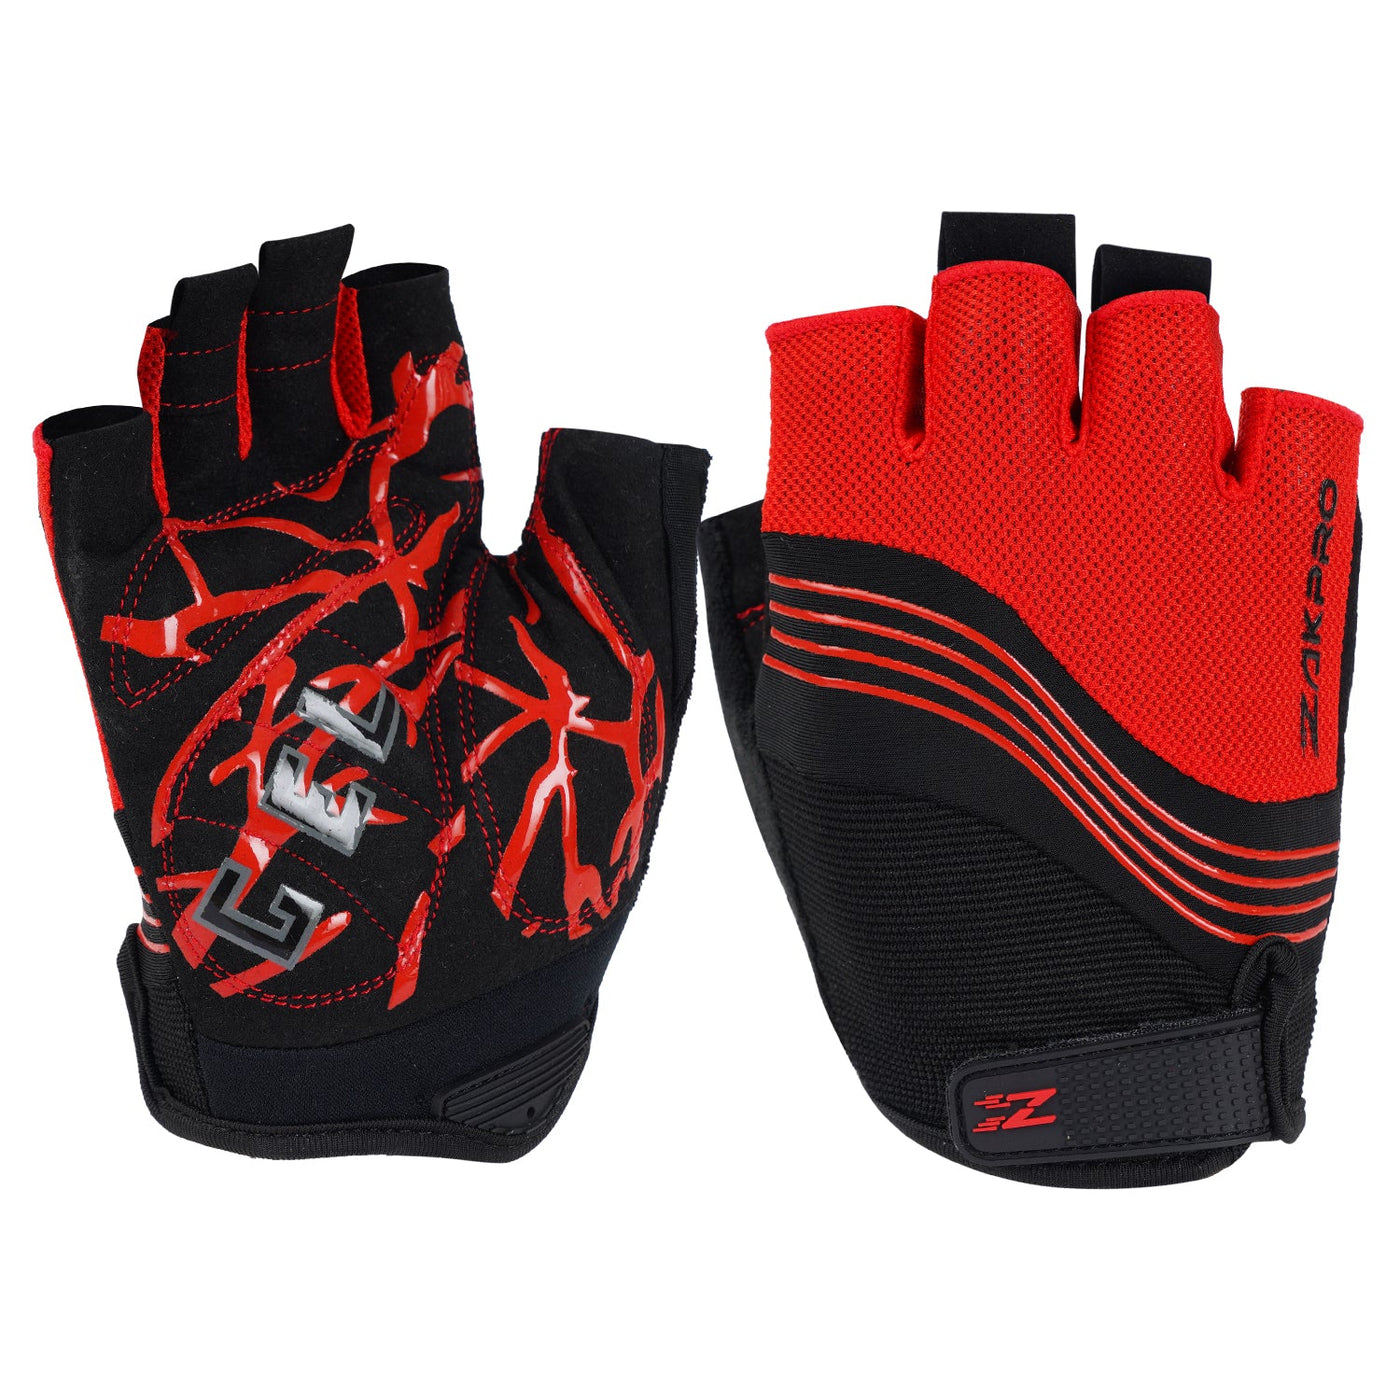 ZAKPRO Gel Series Anti-Slip Professional Half Finger Cycling Gloves - Red - Cyclop.in